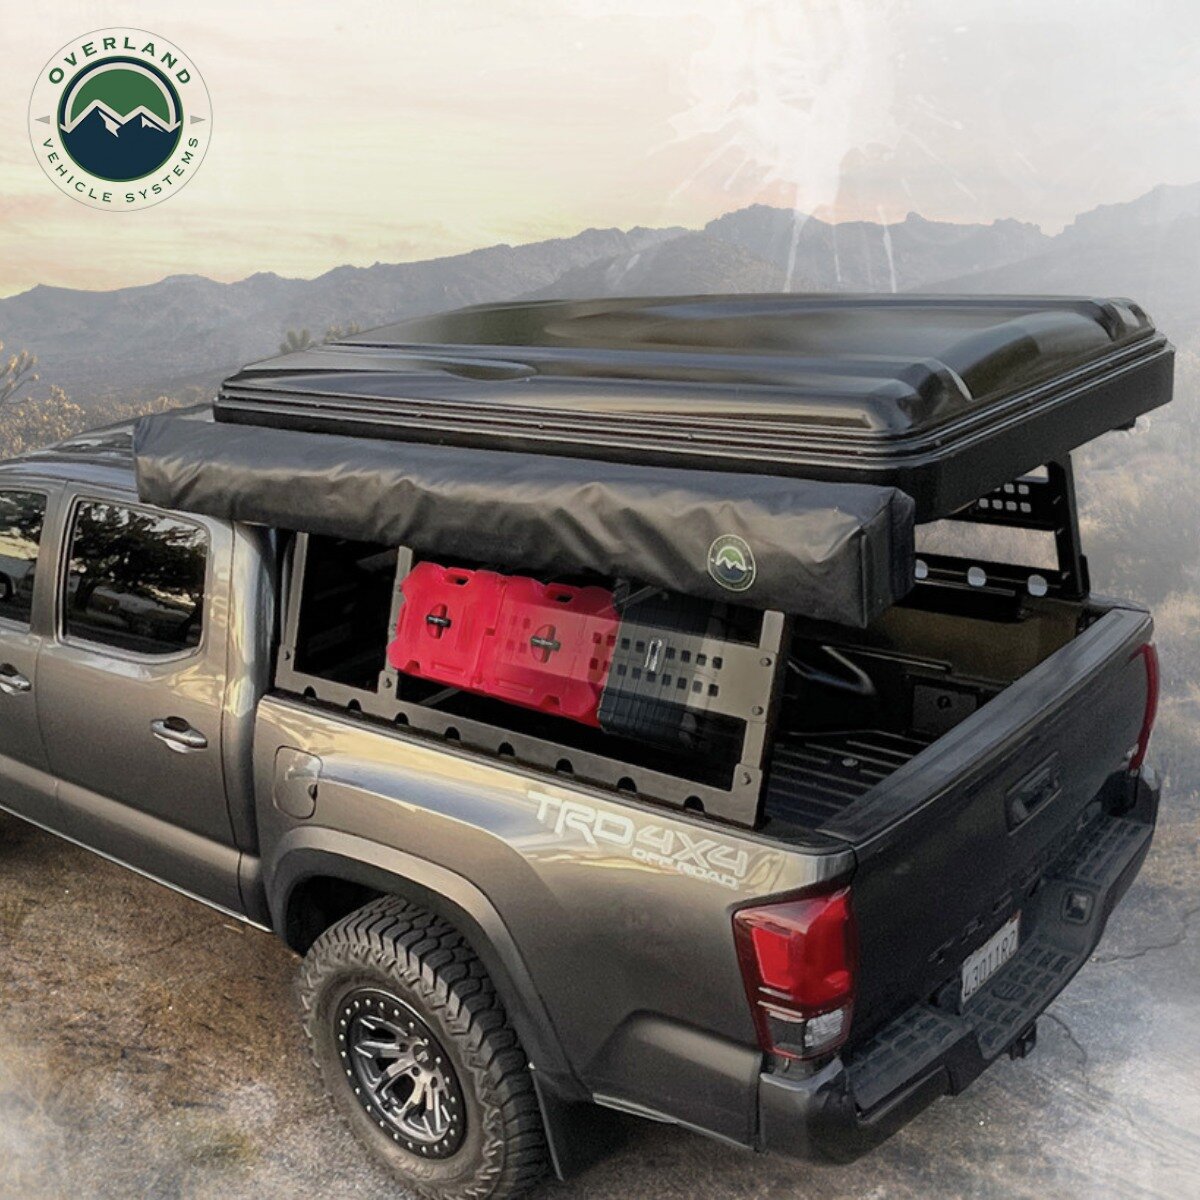 Haul all your gear with Overland Vehicle Systems&rsquo; Discovery Rack.

Overland Vehicle Systems&rsquo; Discovery Rack is a multipurpose, cab height, truck bed rack that meets the needs of every overlander. The Discovery Rack is a mid-size truck app